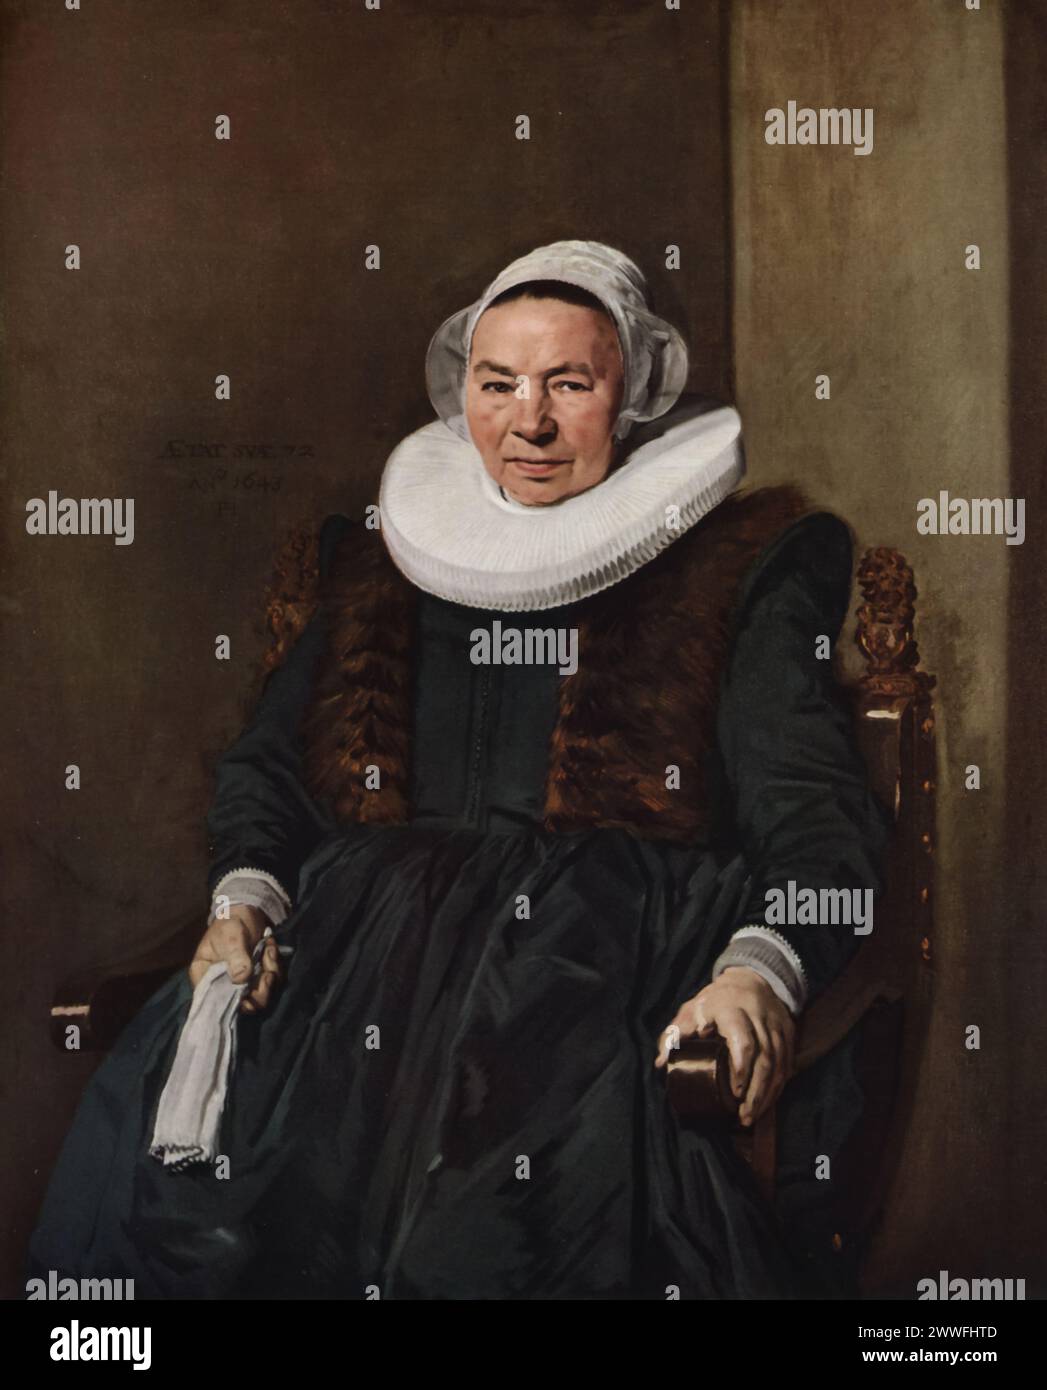 Frans Hals' 'Portrait of Aletta Hanemans (Vrouw Bodolphe)' (circa 1625): Located in the Frans Hals Museum, Haarlem. The painting features Aletta Hanemans, the wife of merchant and shipowner Bodolphe, dressed in her finery. Hals' work is celebrated for its vivid portrayal of character and the casual elegance of the sitter, reflecting the Dutch Golden Age's interest in individual identity and social status. Stock Photo